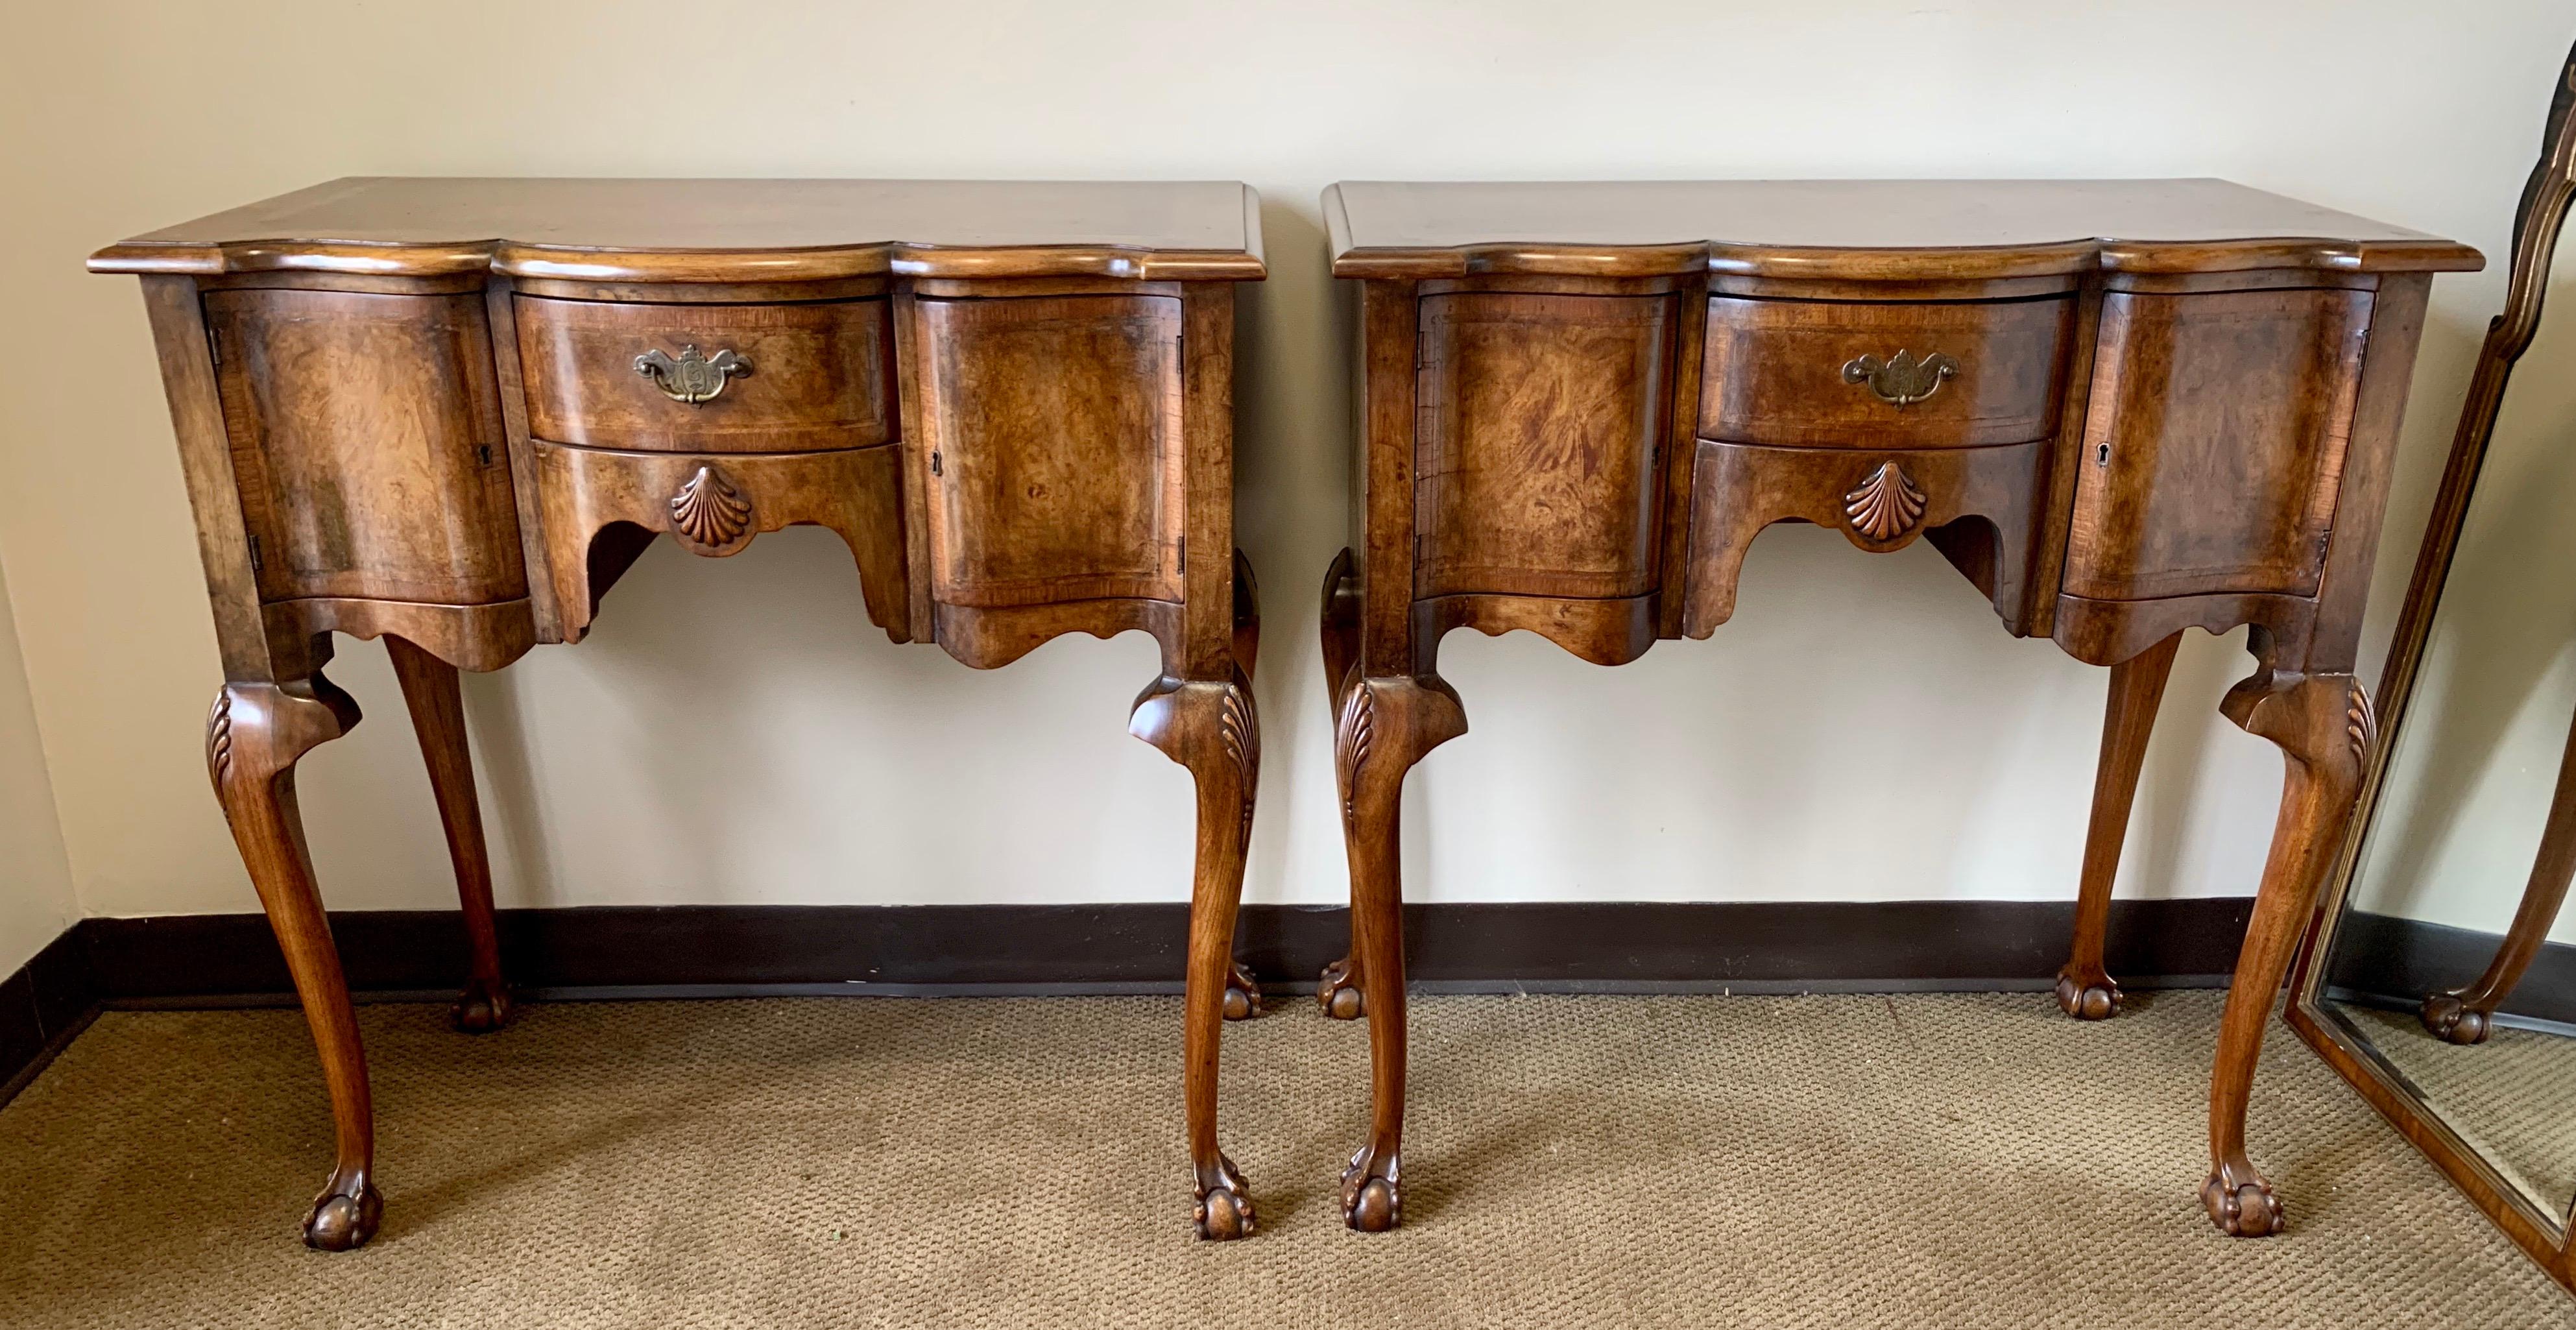 Coveted pair of matching carved burled walnut console tables with black lacquer and gold hand painted mirrors above. The table has storage and key to lock which make the possibilities endless. Dry bar, console table, accent table, foyer piece - your